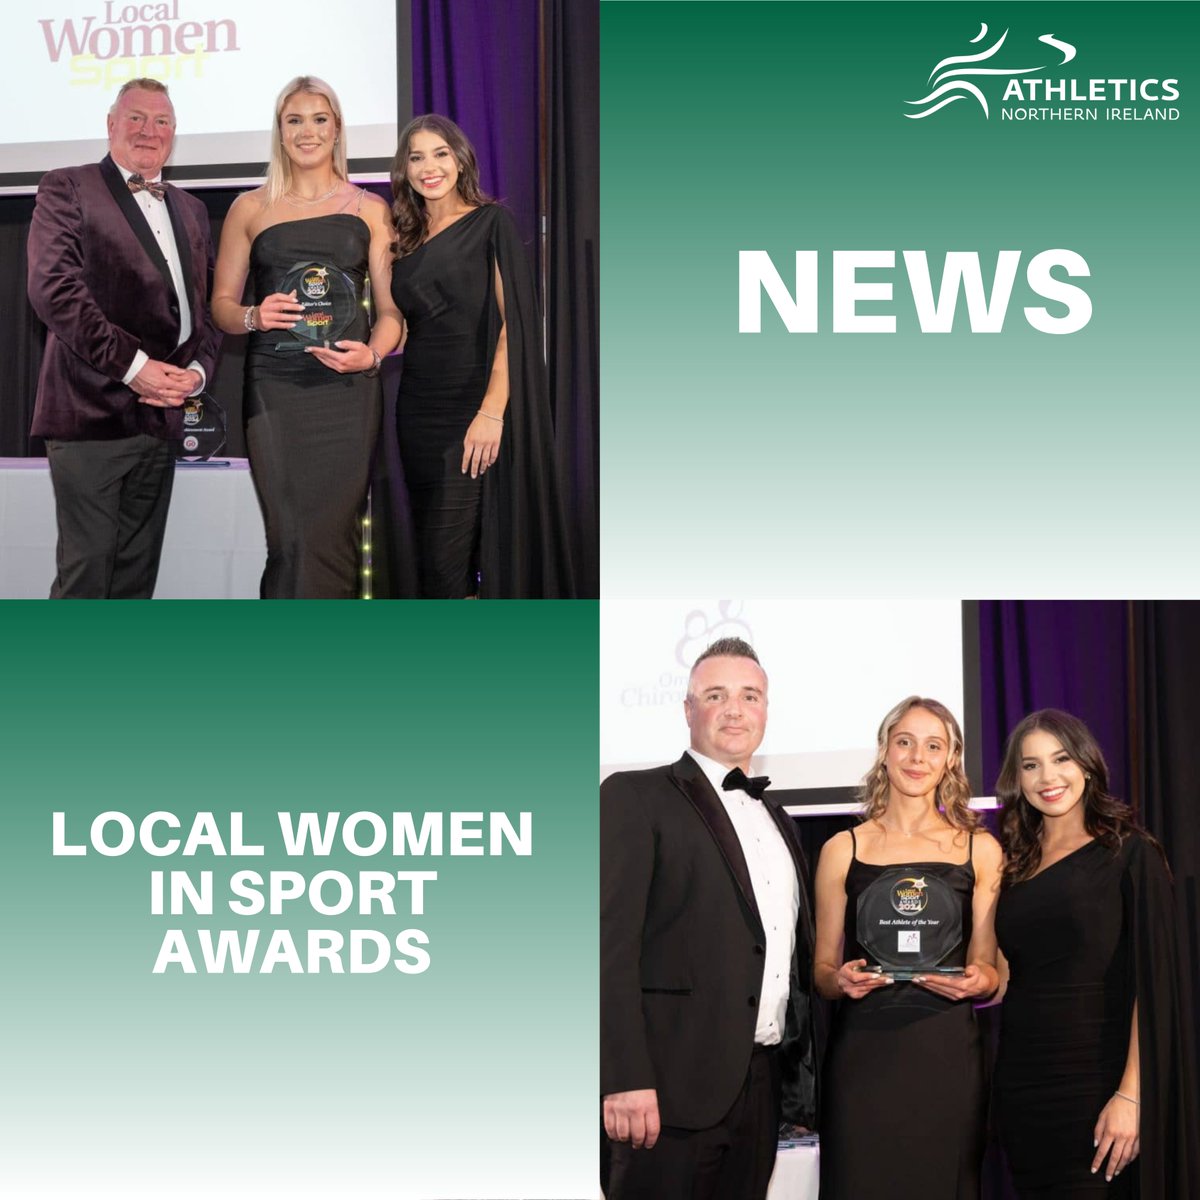 📰 Outstanding Athletic Achievements at the Local Women in Sport Awards Brynja Brynjarsdottir and Anna Gardener win ‘Editors Choice’ and ‘Best Athlete of the Year’ awards at the Local Women in Sport Awards. Full news story 👇 athleticsni.org/News/Athletics…